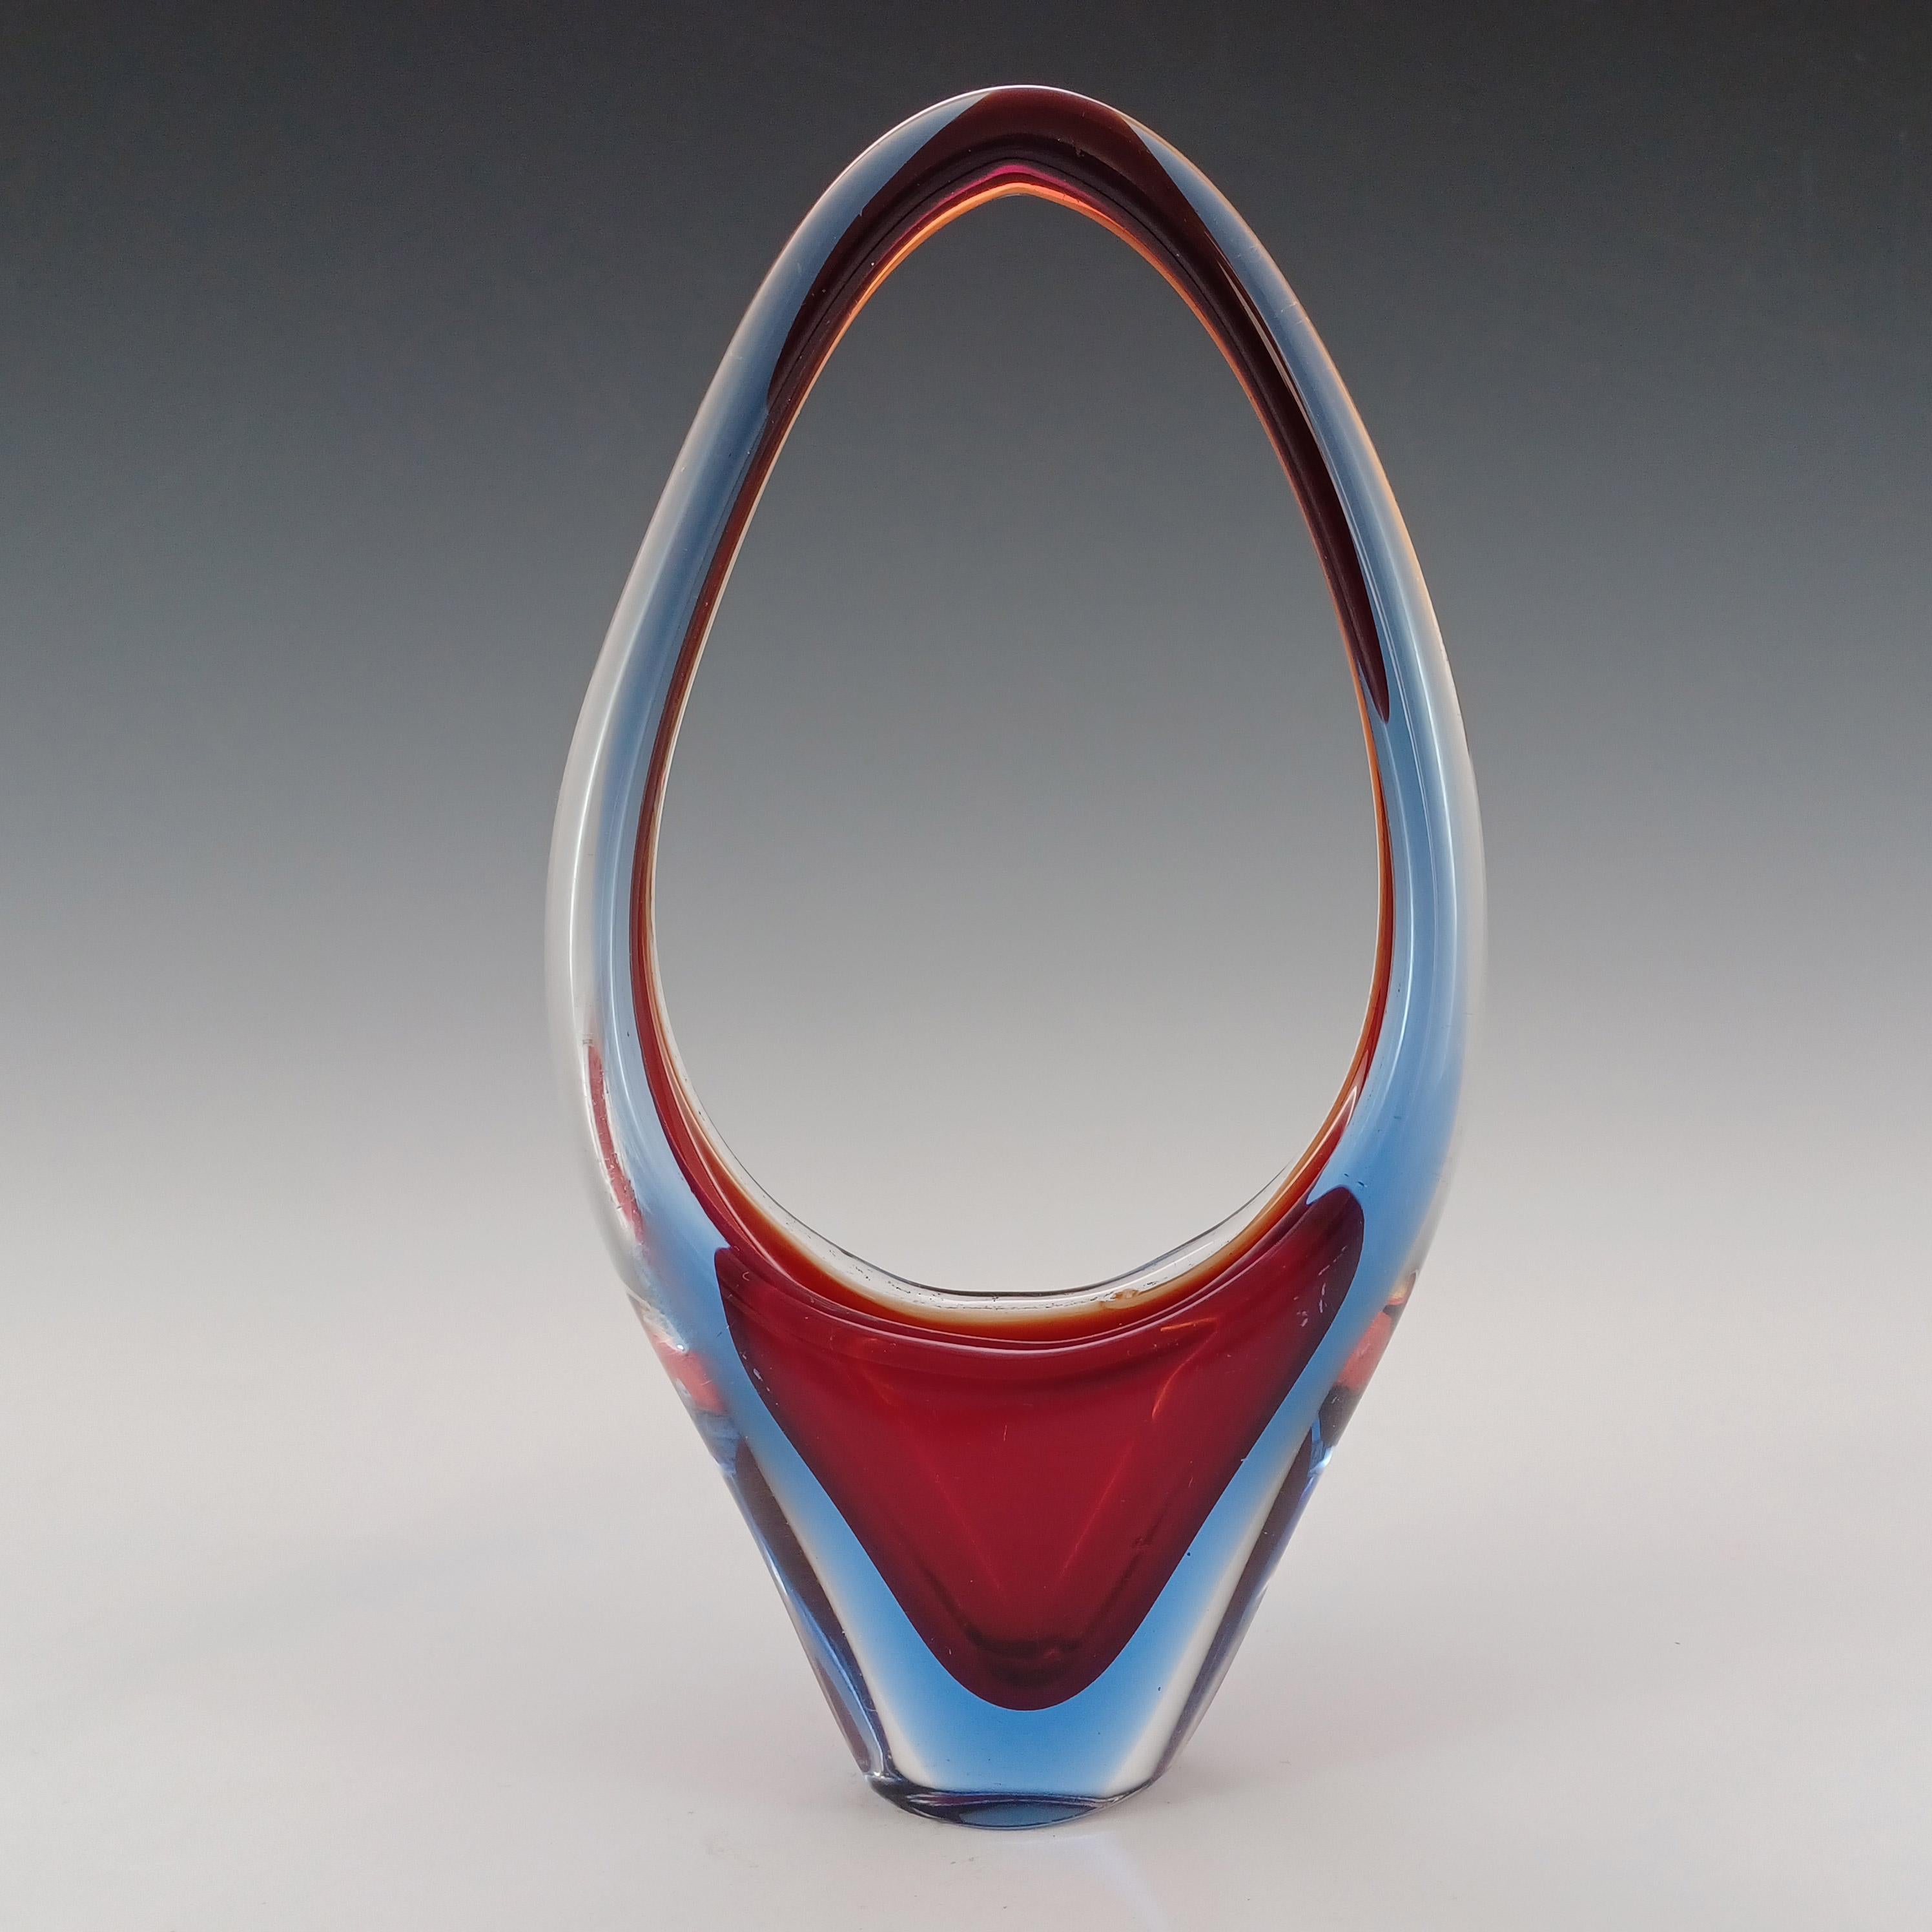 A Venetian organic glass basket shaped vase or bowl, made on the island of Murano, near Venice, Italy. In a stunning combination of orangey red glass cased in blue glass, which is further encased in clear glass, using the renowned Venetian sommerso